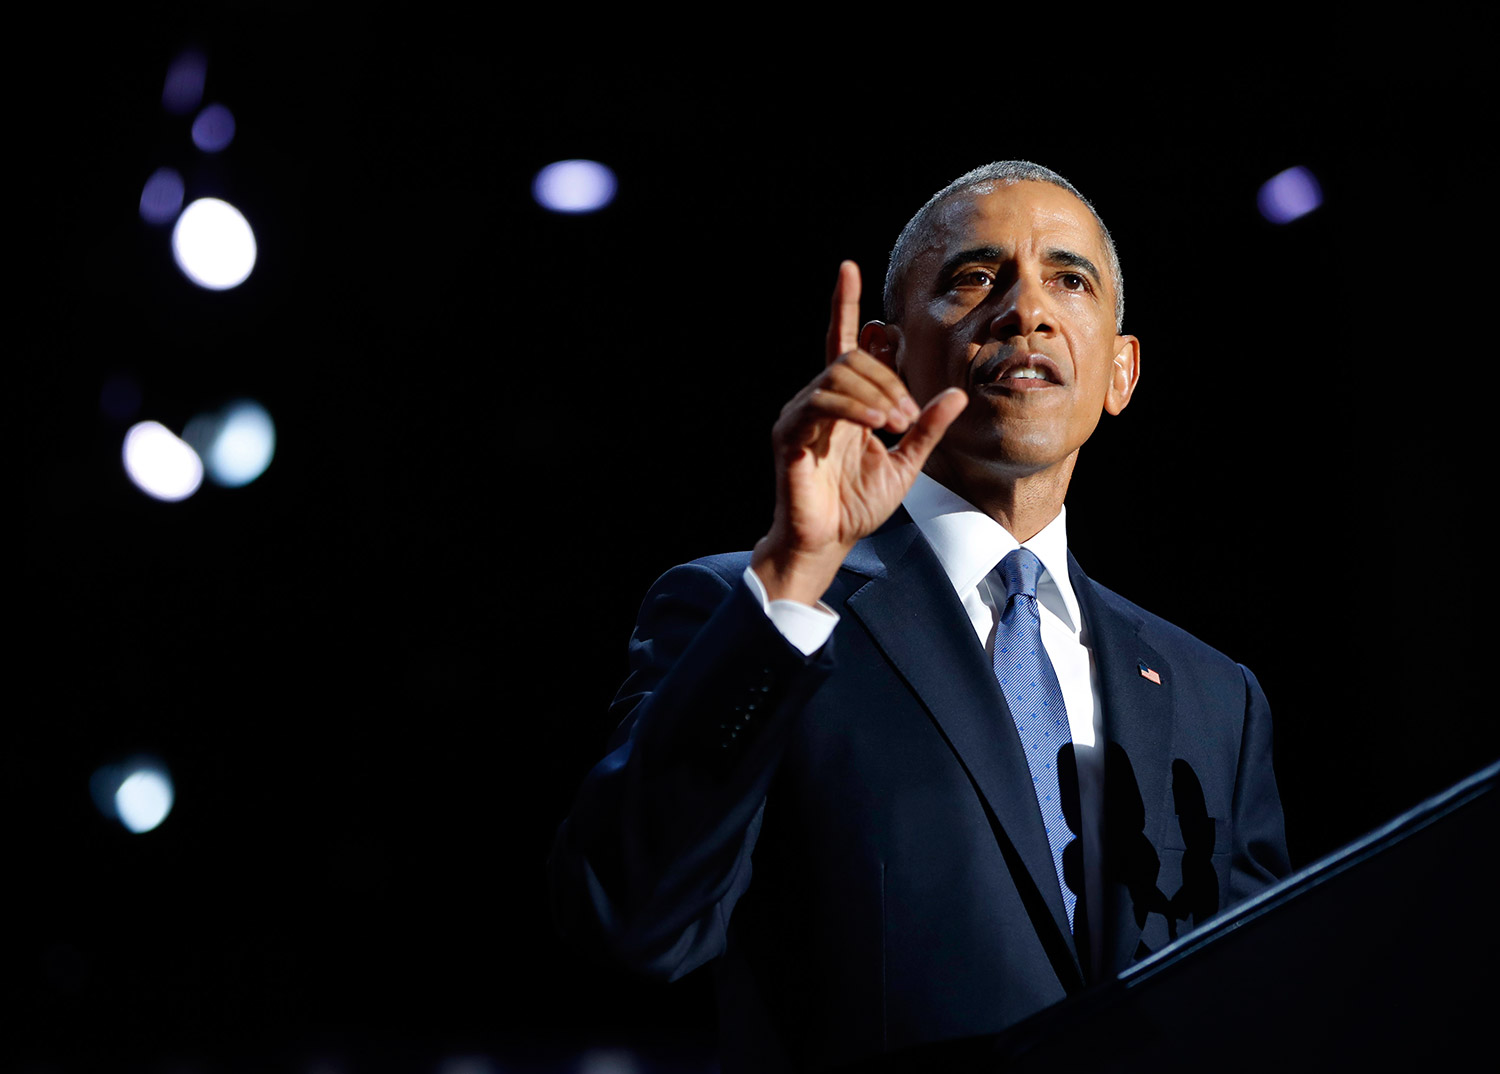 President Obama speaks during his farewell address at McCormick Place in Chicago on Tuesday night. He said he ends his tenure inspired by America's "boundless capacity" for reinvention. Associated Press/Pablo Martinez Monsivais